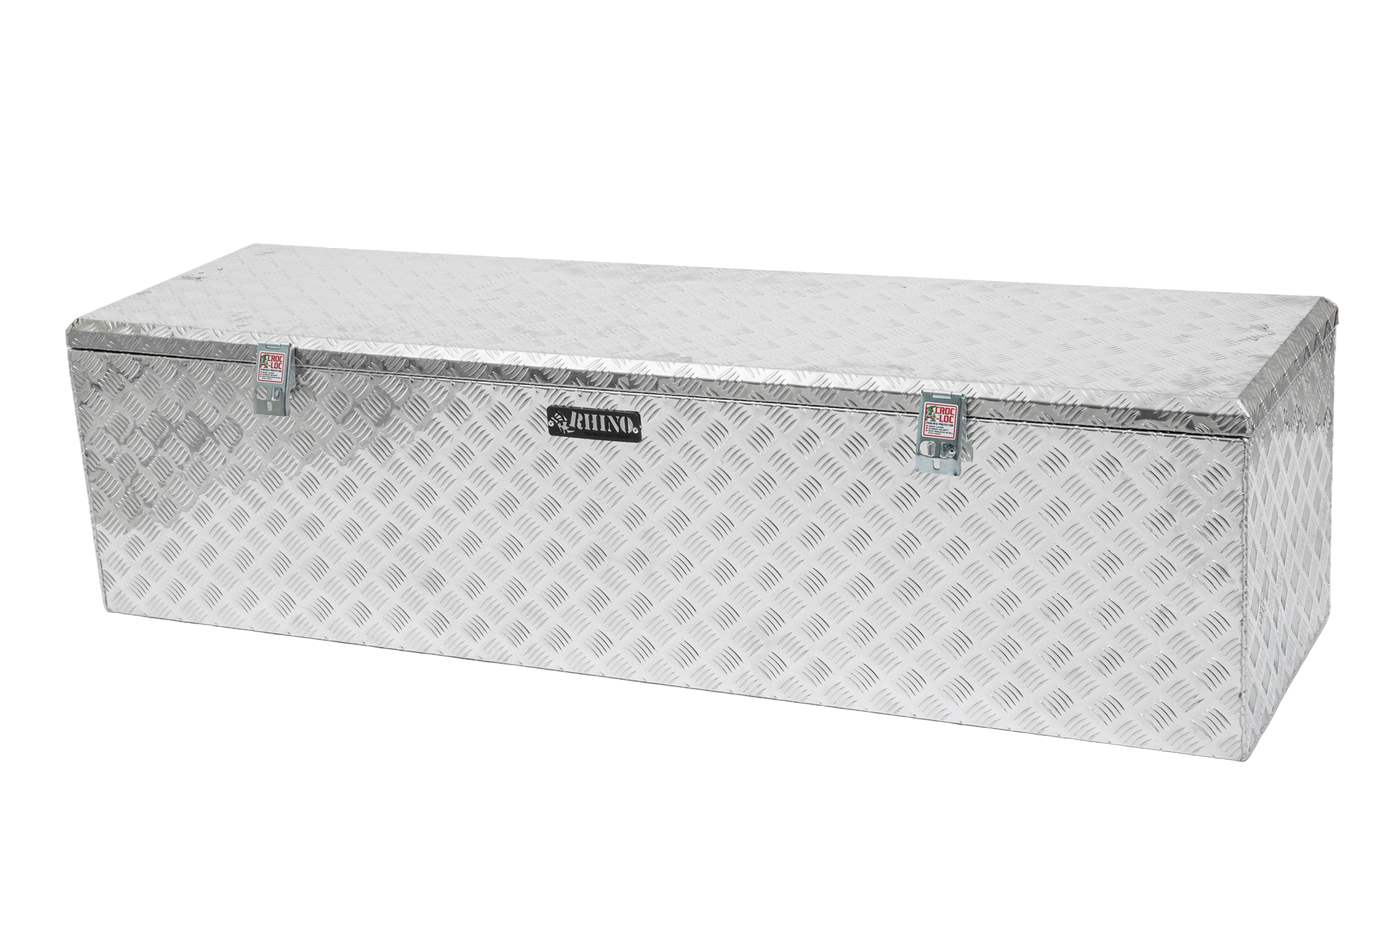 Large Single Opening Checker Plate Aluminium Tool Box with Secure Locks Isometric View